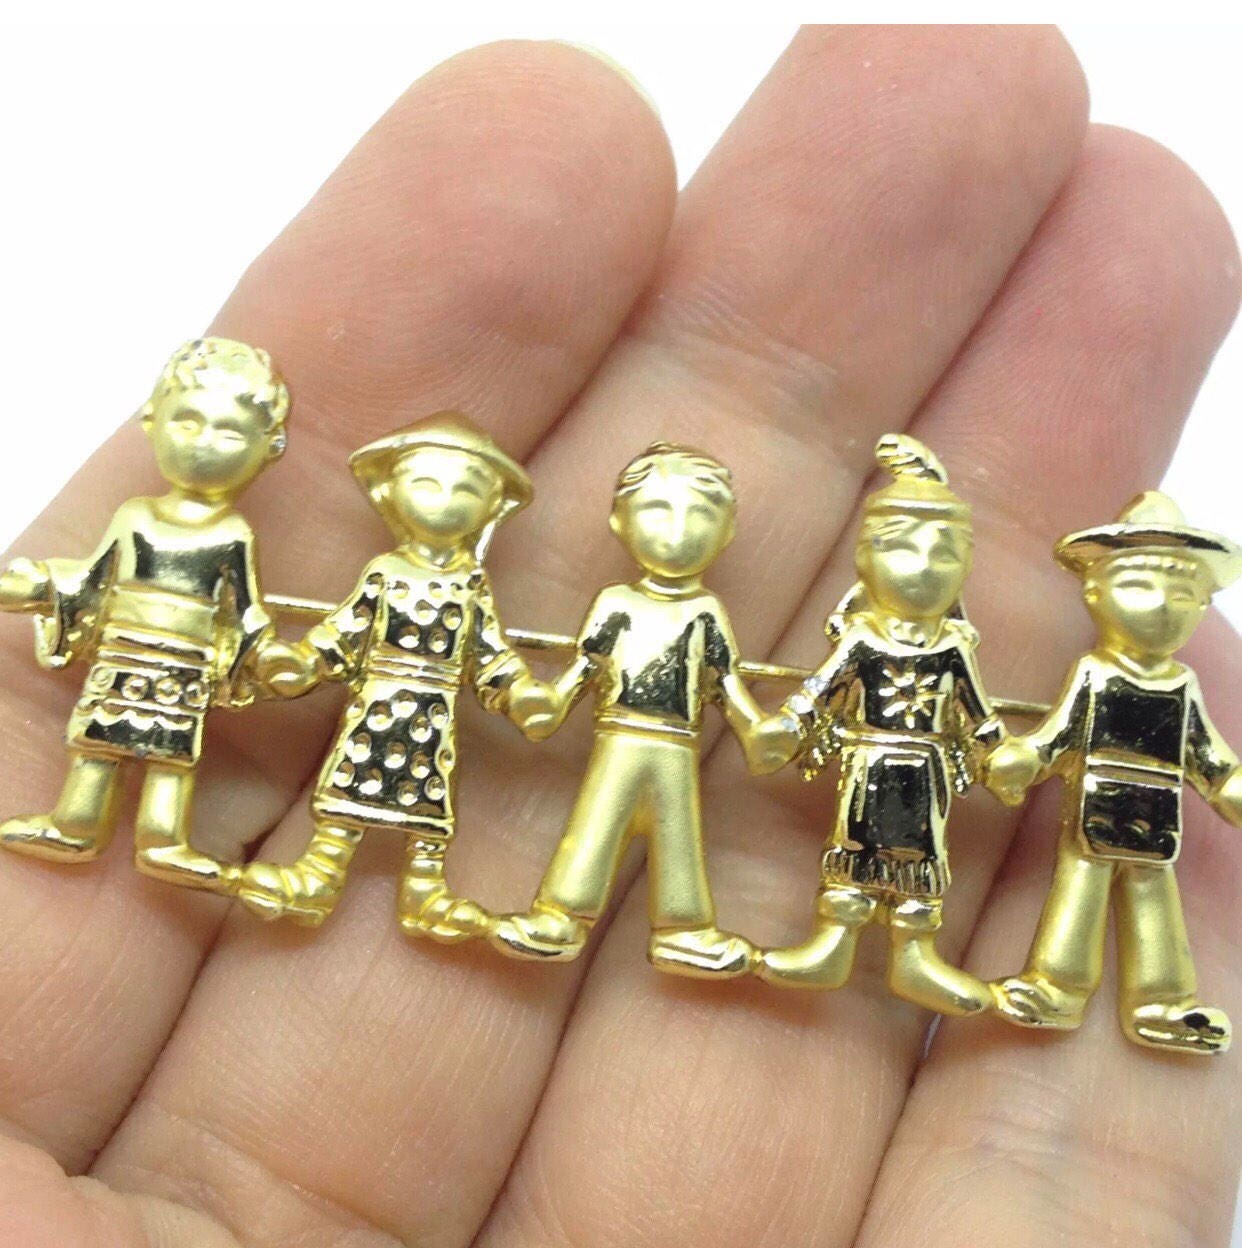 Signed Ajc Vintage 5 People Of The World Brooch Pin Nationality Gold Tone United We Stand